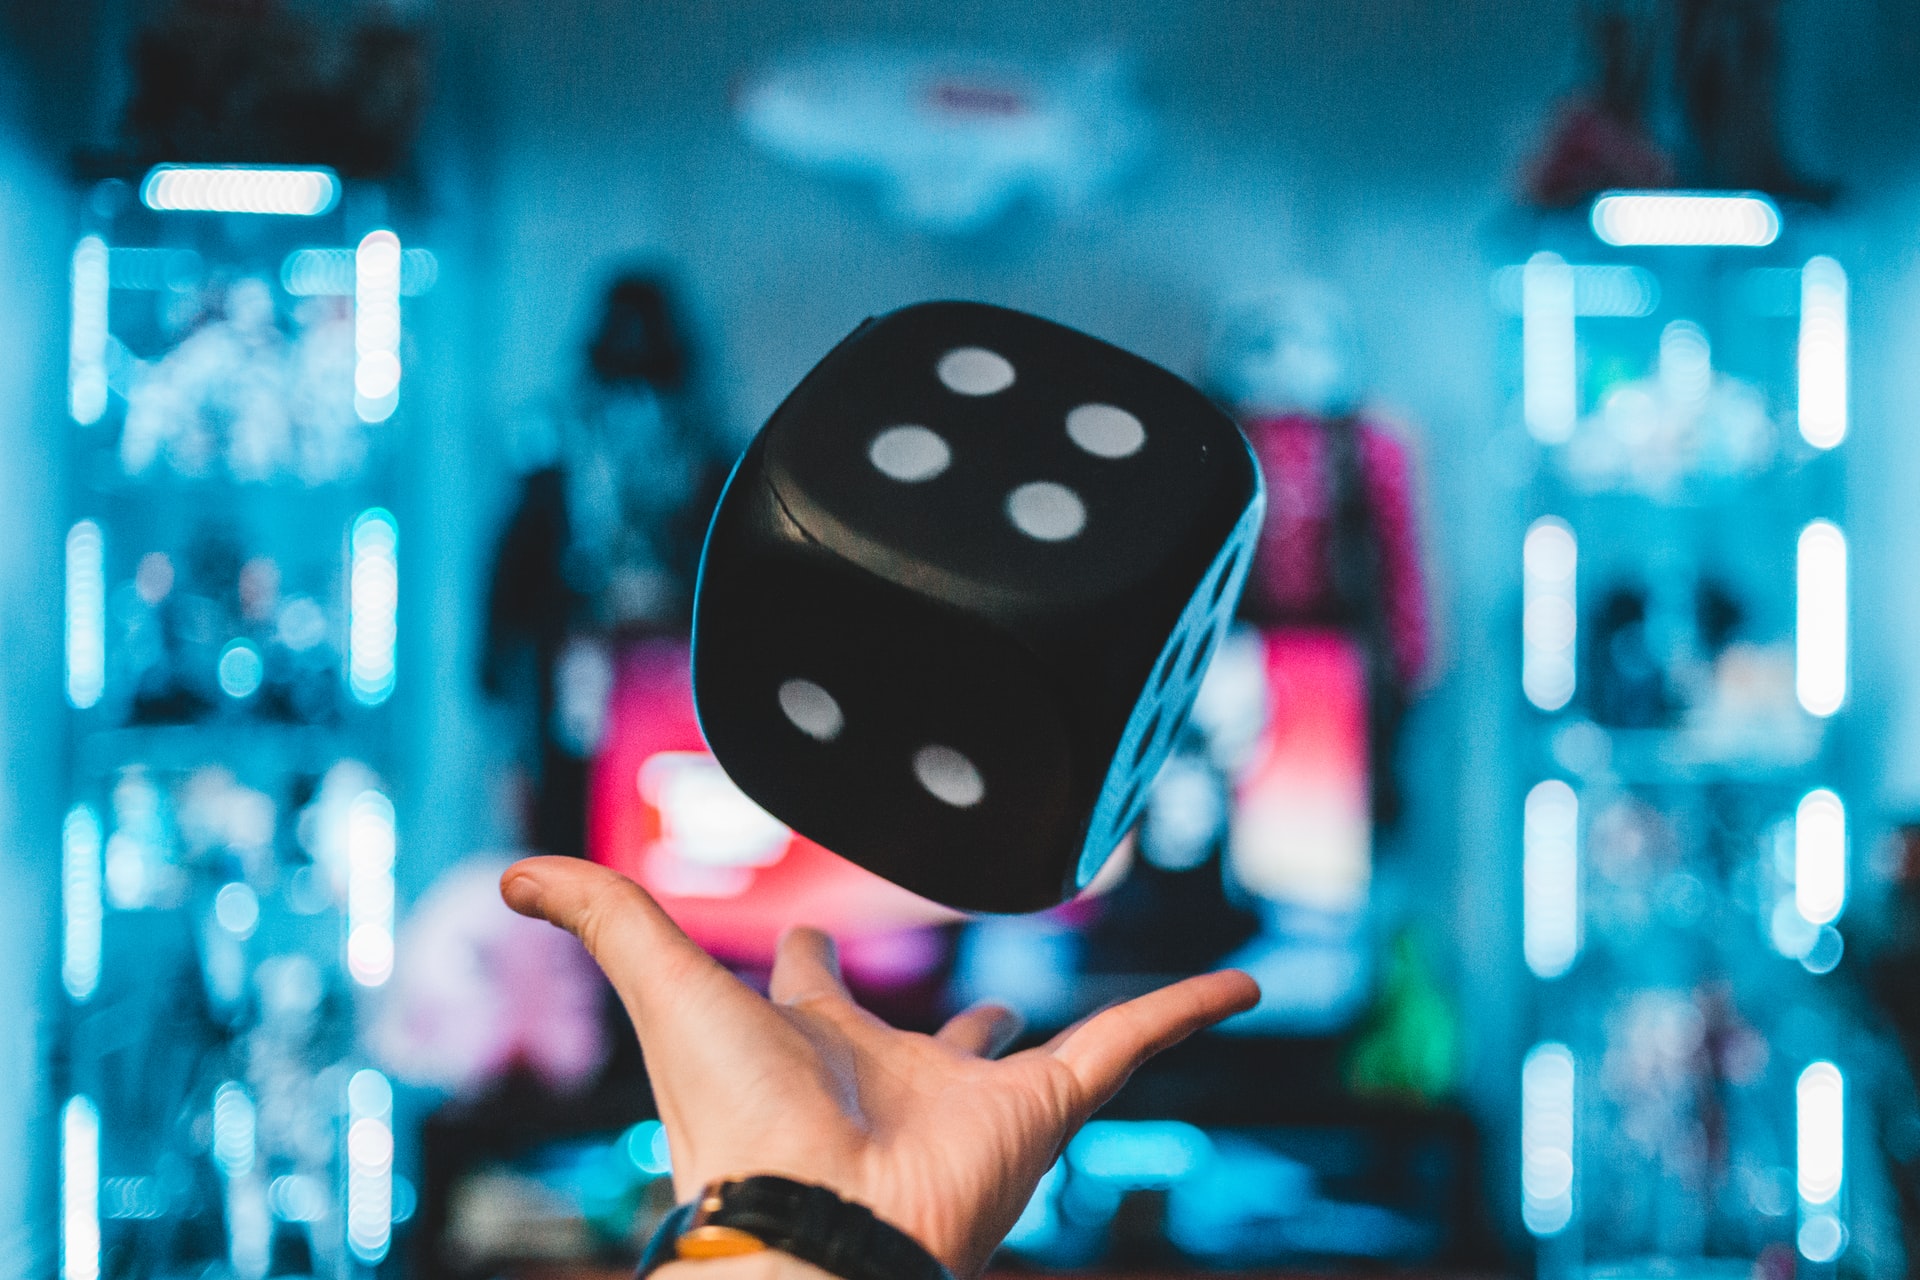 Let’s take a look at the popular casino games of 2021.